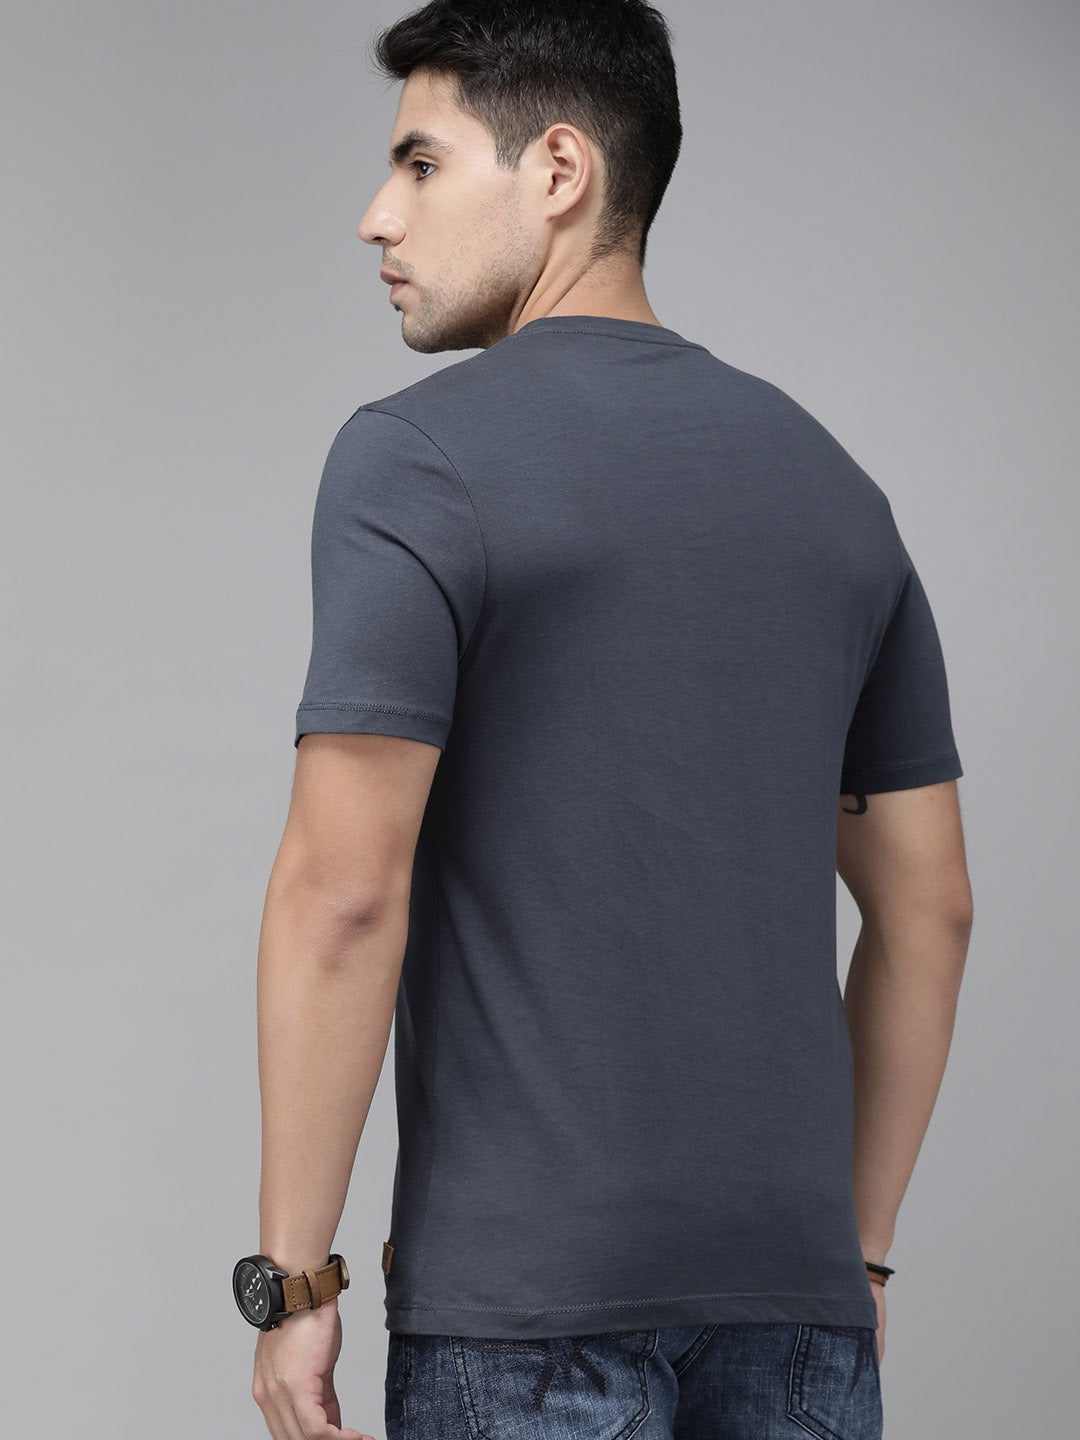 Men's Solid Charcoal Cotton Tee